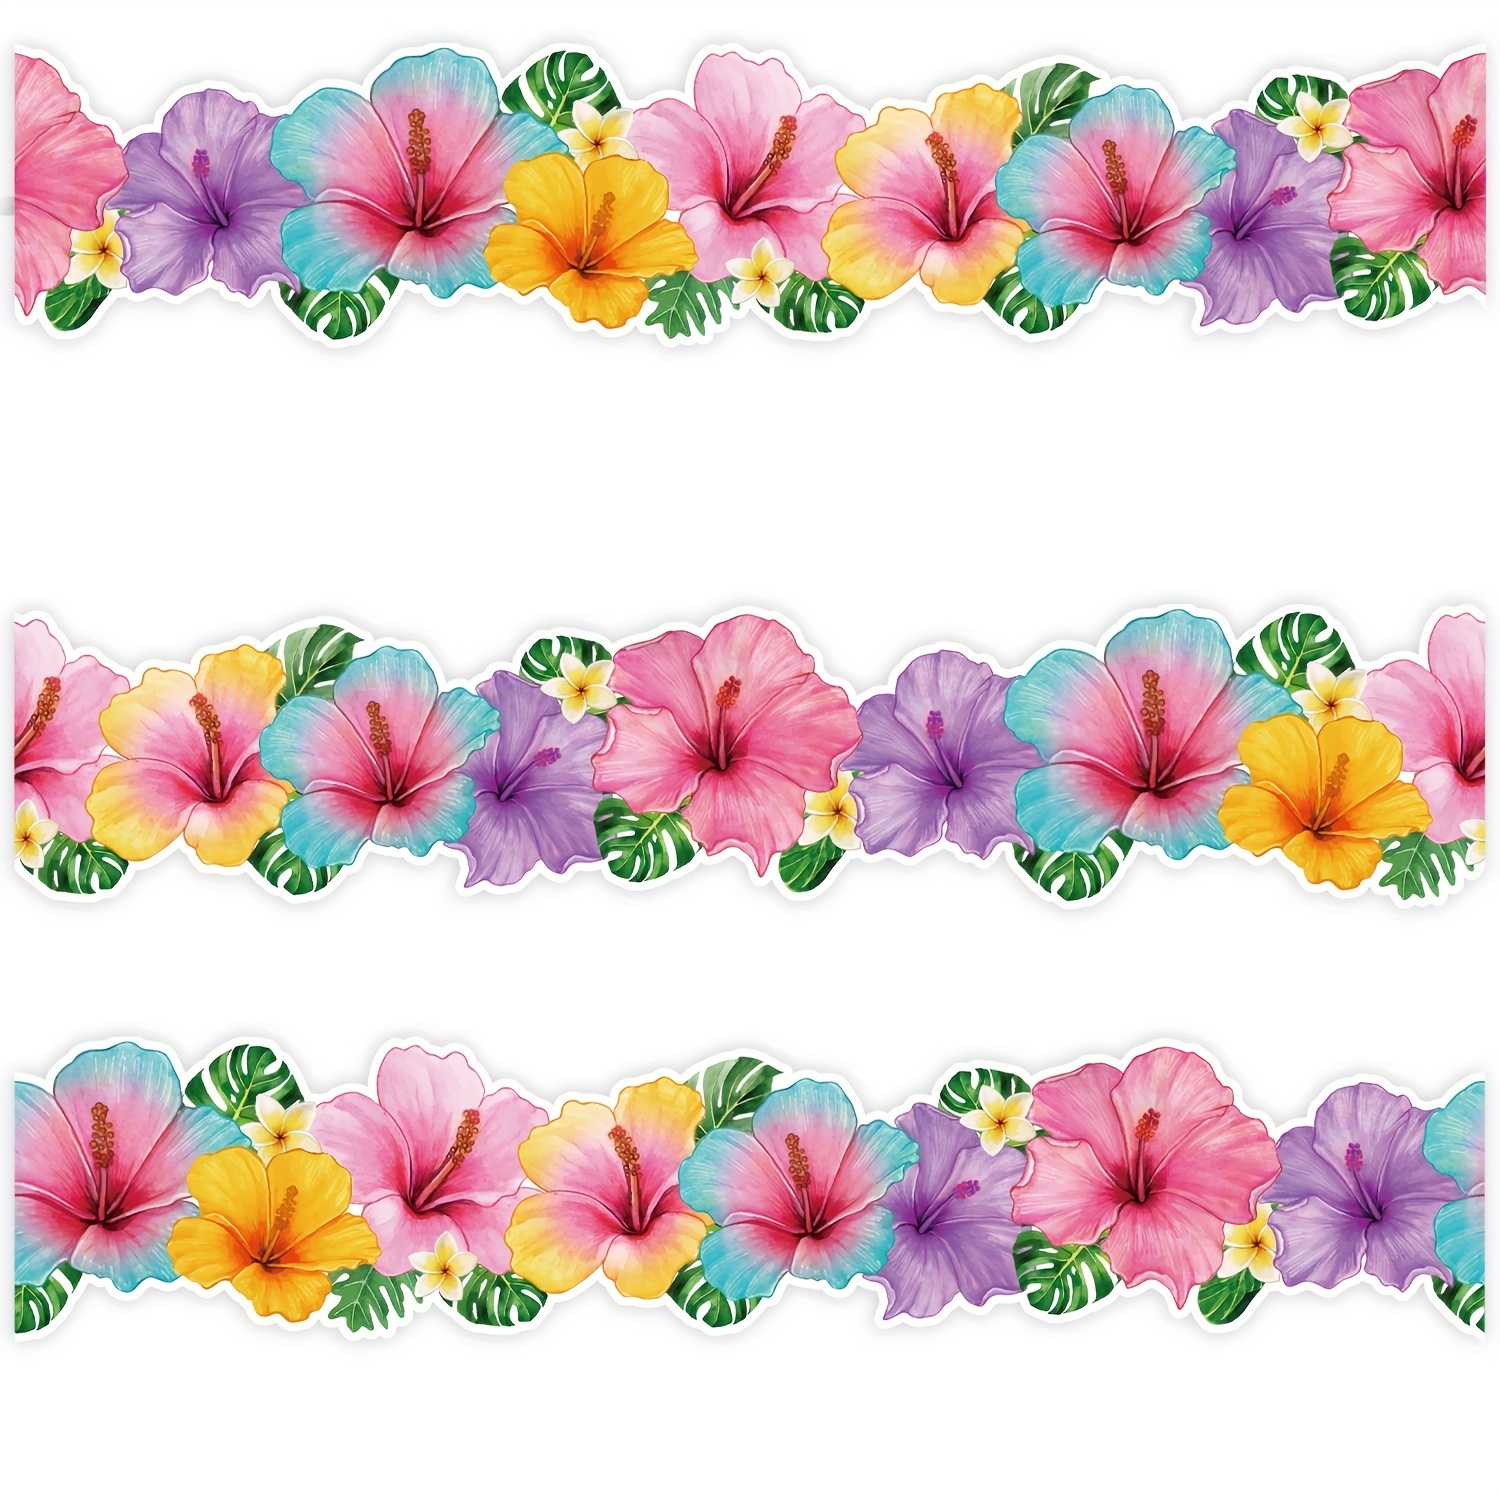 

49ft Tropical Animal Print Bulletin Board Border Trim - Colorful, Removable & Reusable For Classroom, Office & School Decor